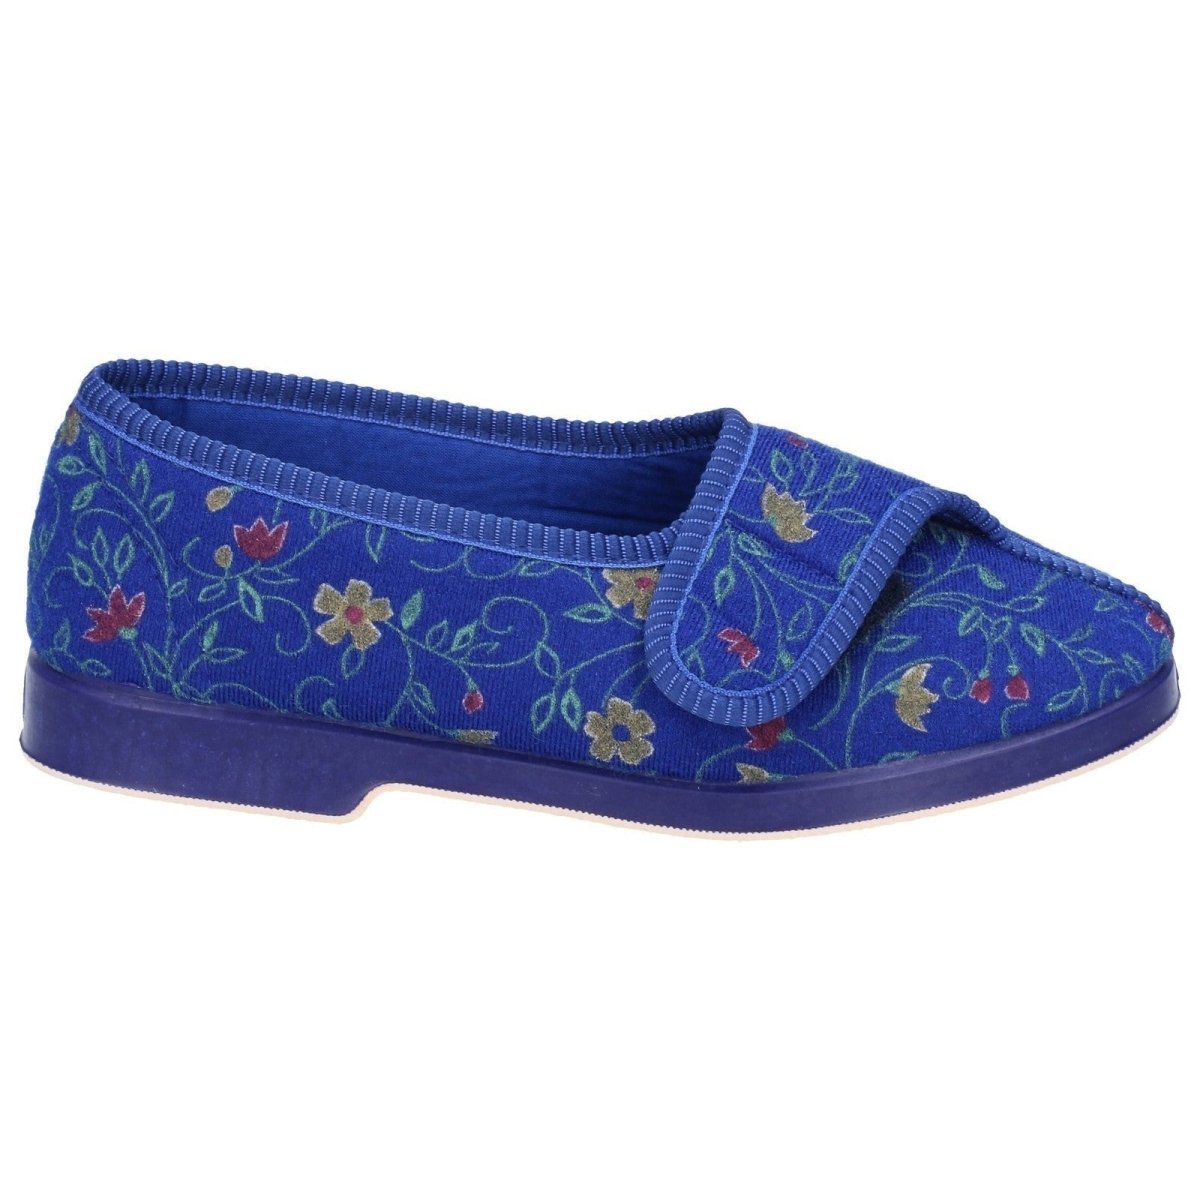 GBS Wilma Ladies EE Wide Fit British Floral Print Slippers - Shoe Store Direct